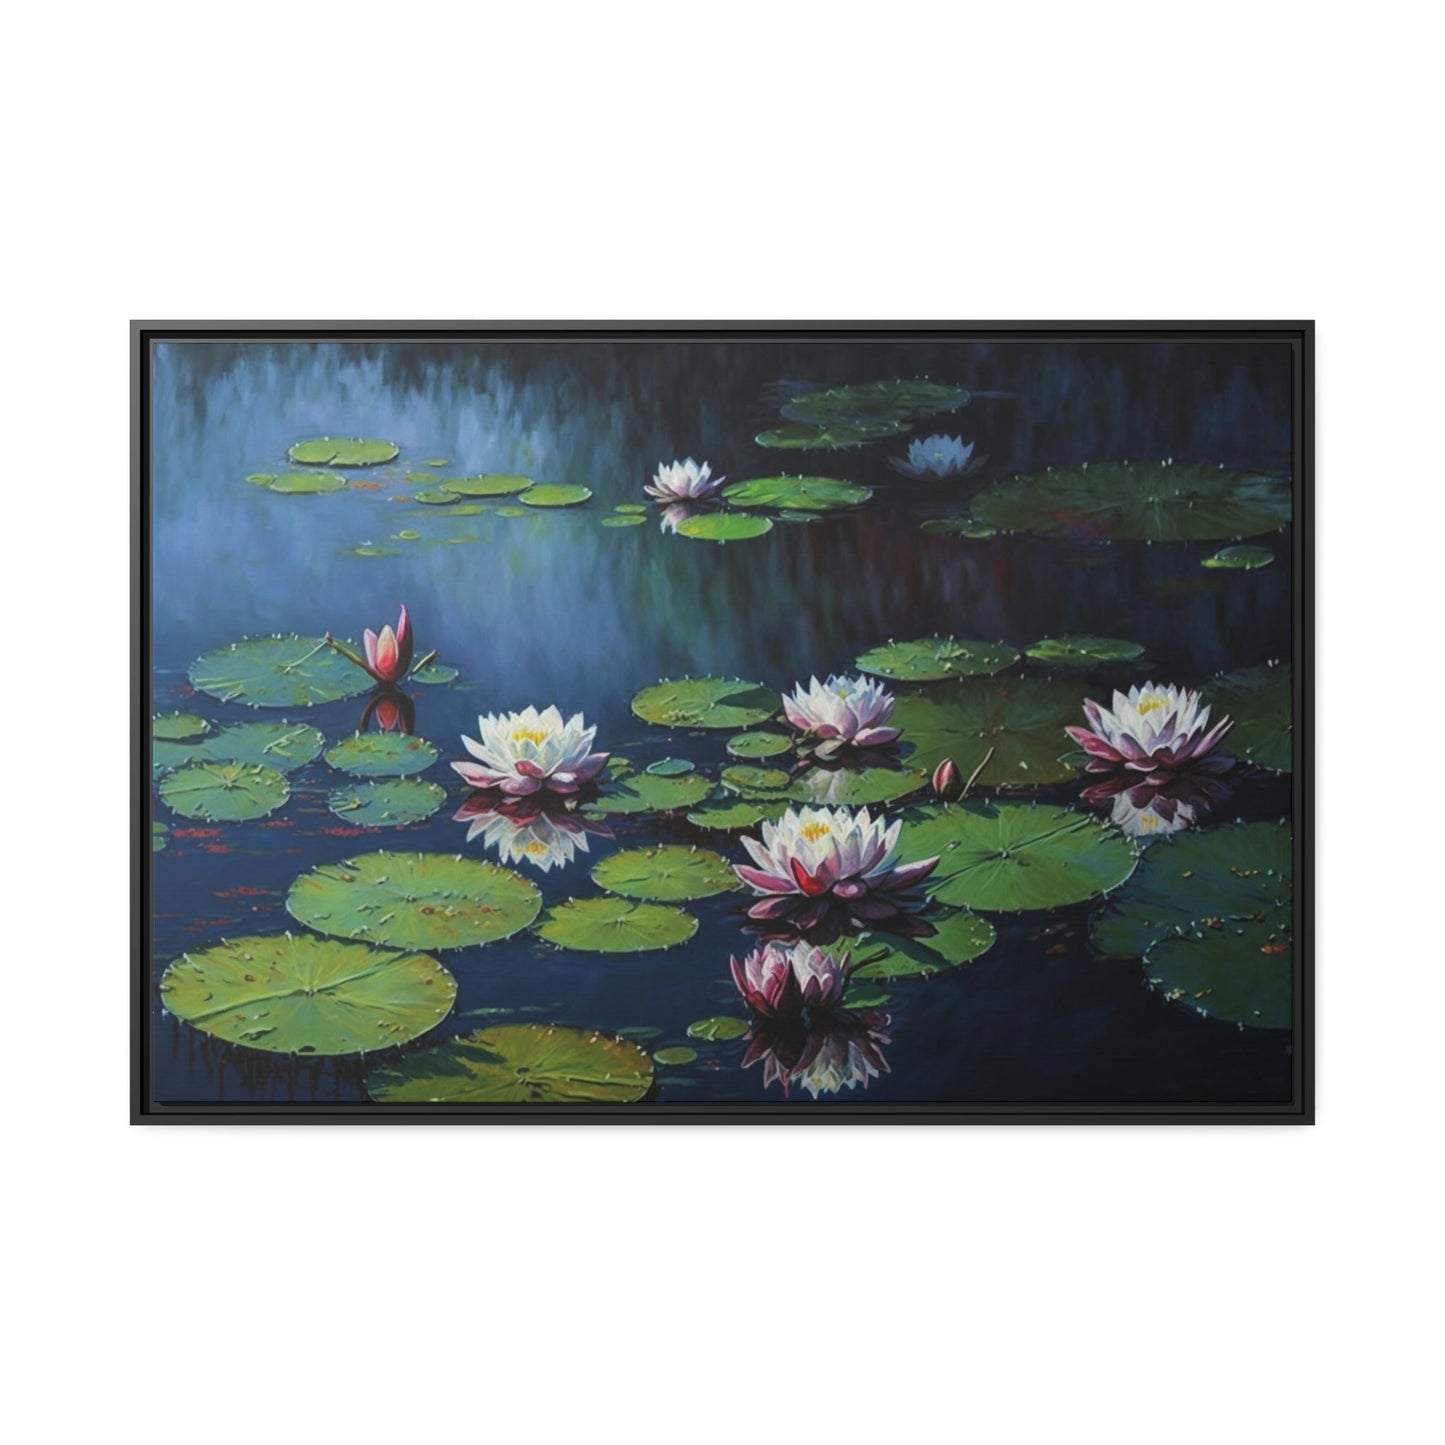 Water Lily Serenity: A Painting on Canvas